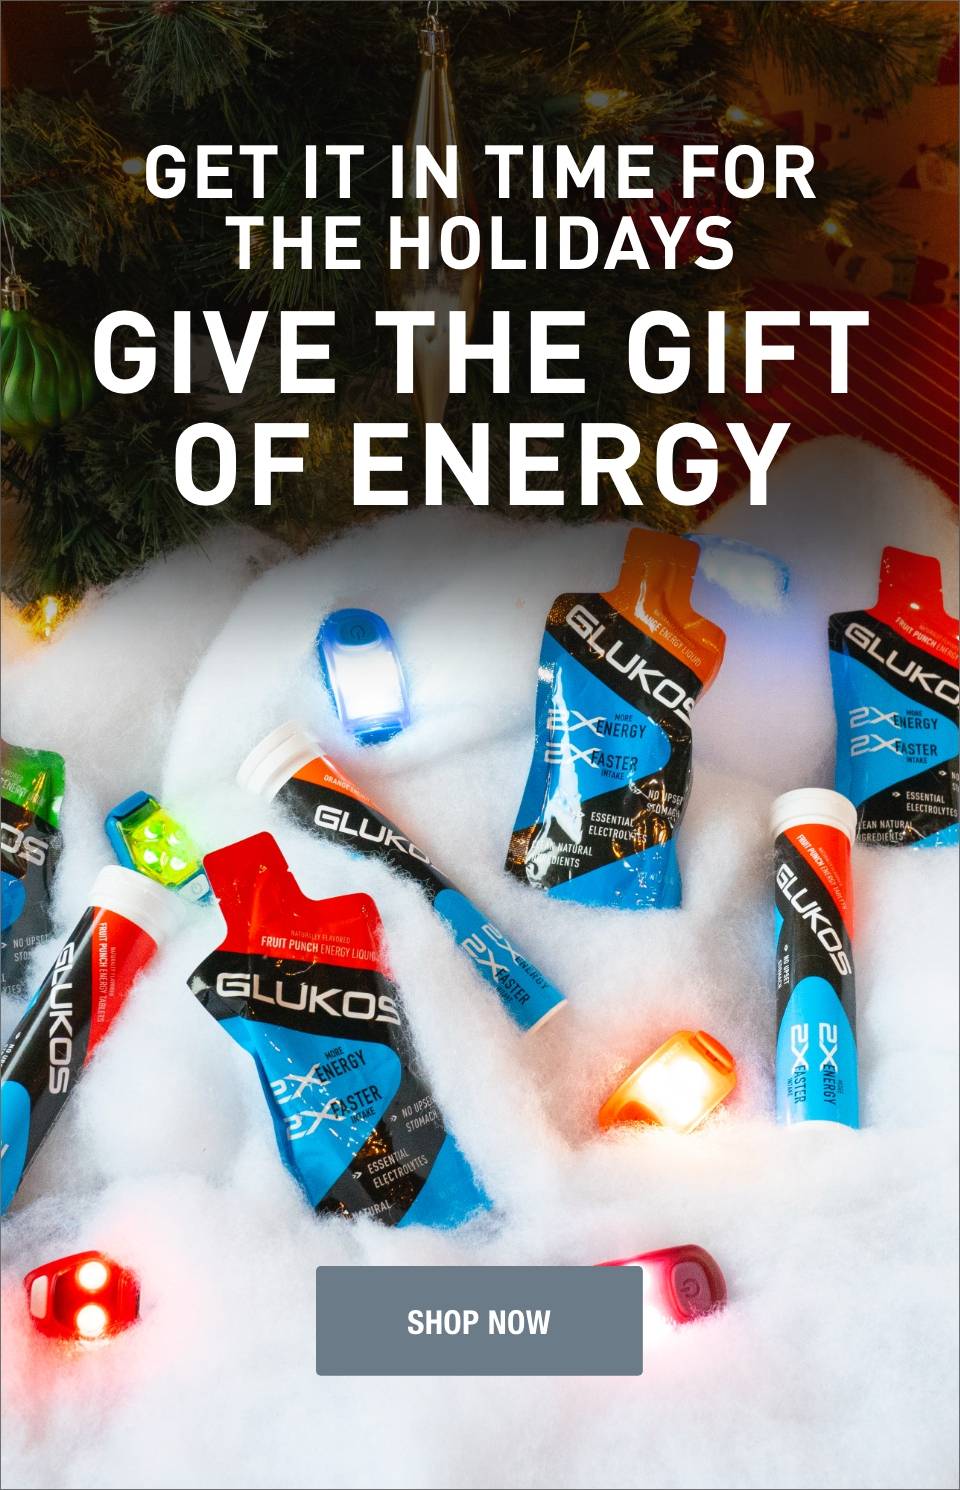 Get it in time for the holidays. Give the gift of energy. Shop Now.